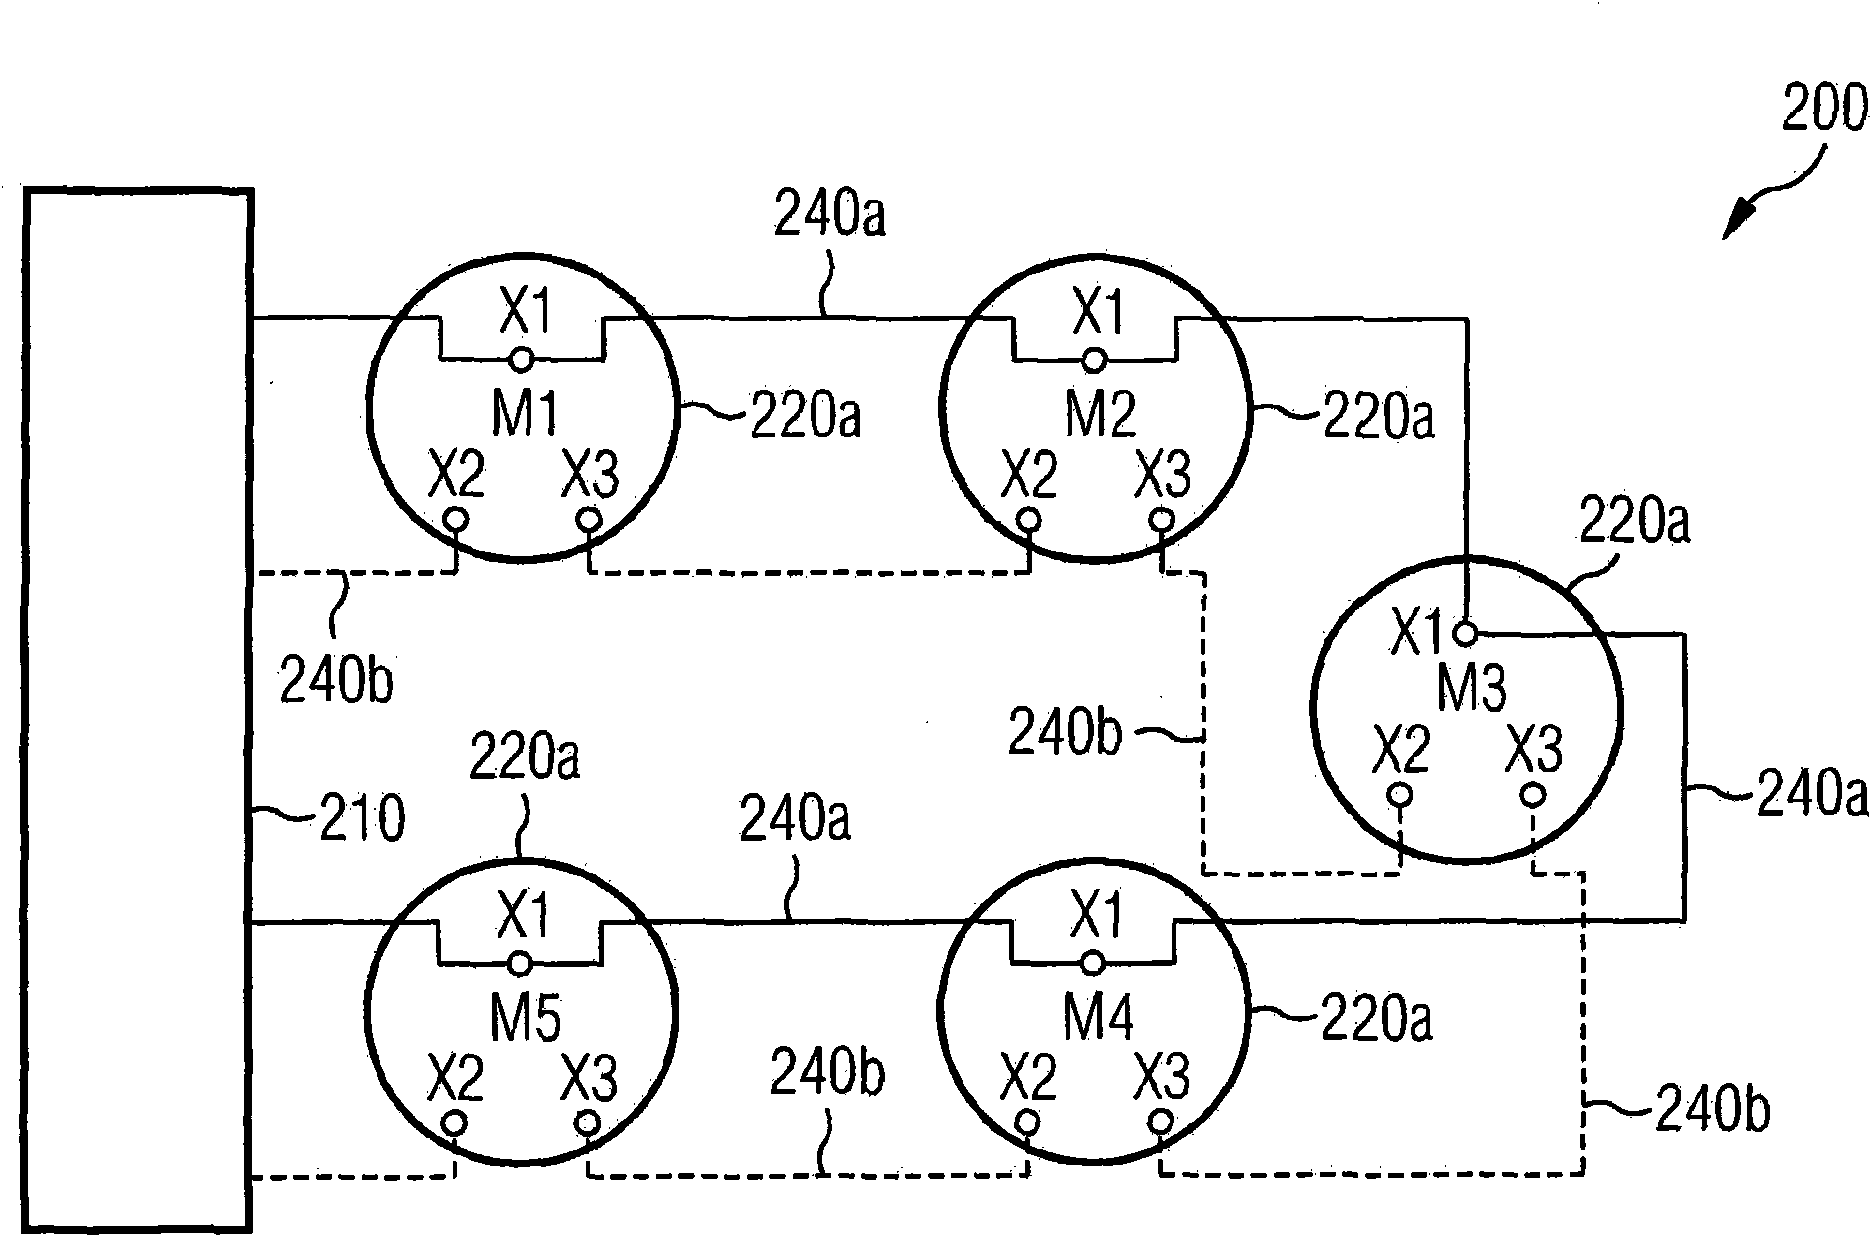 Interface for connecting a converter device to two-wire line